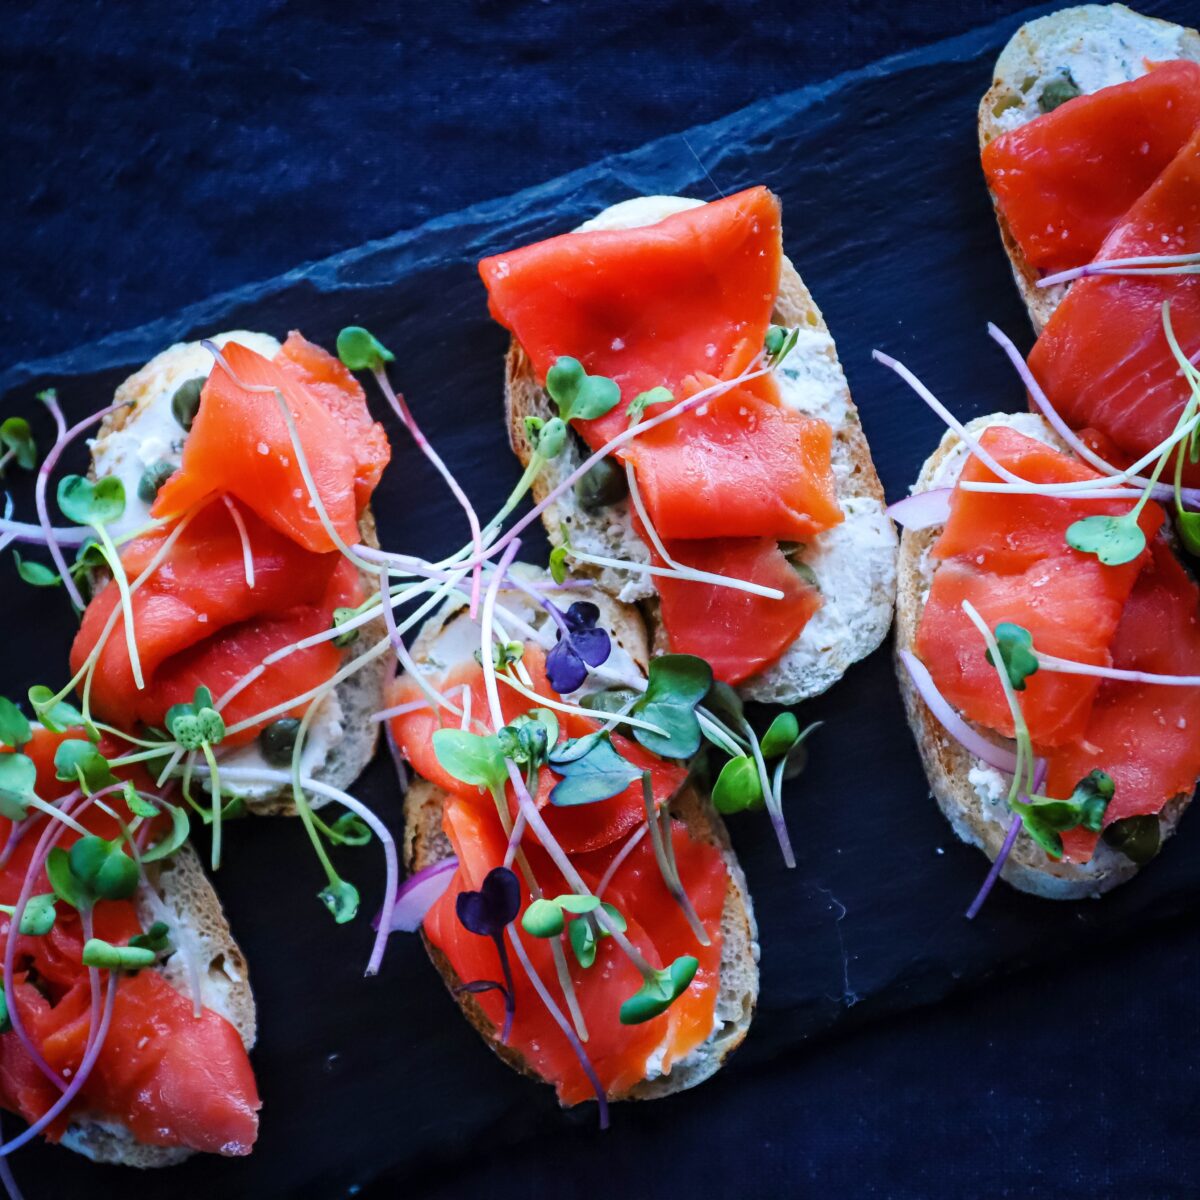 Slices of crostini topped with creamy dressing, thin slices of salmon carpaccio and topped with microgreens all on a black tray.